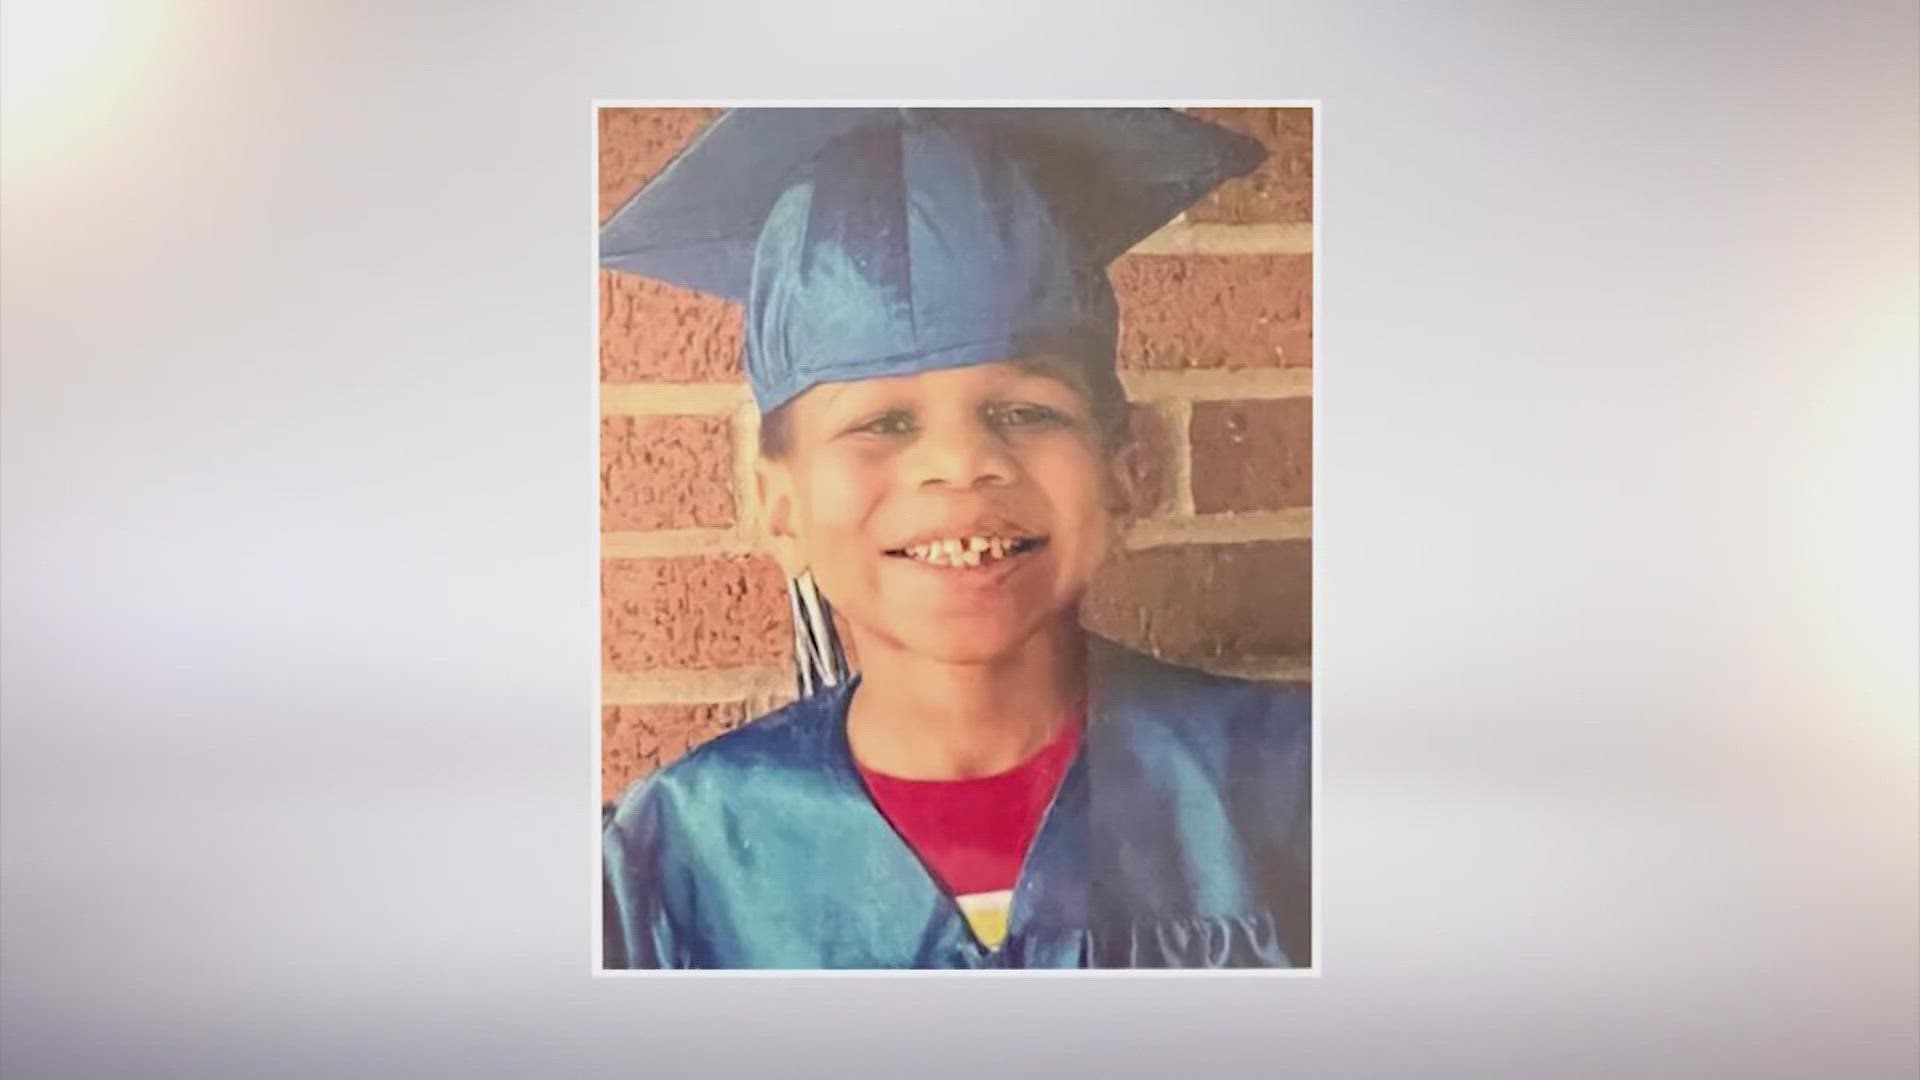 Seven-year-old Troy Khoeler had been missing for a few hours before his body was found. Deputies later found his body in the top-load washing machine in the garage.